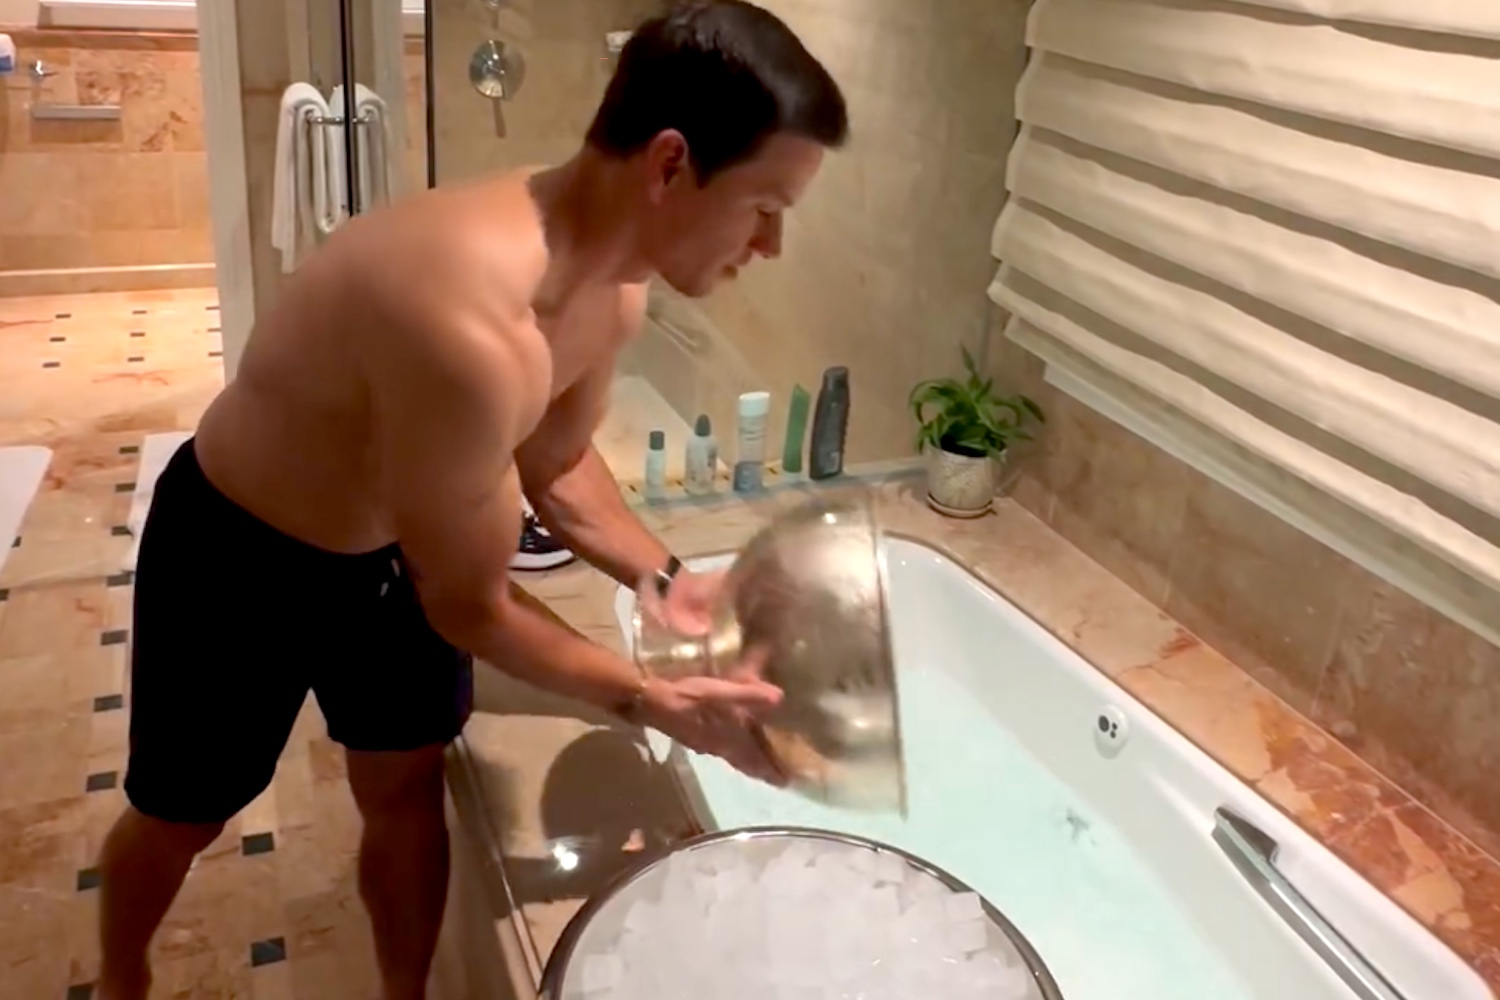 Mark Wahlberg’s 5am Sterling Silver Ice Baths Are The Most Decadent Thing Ever